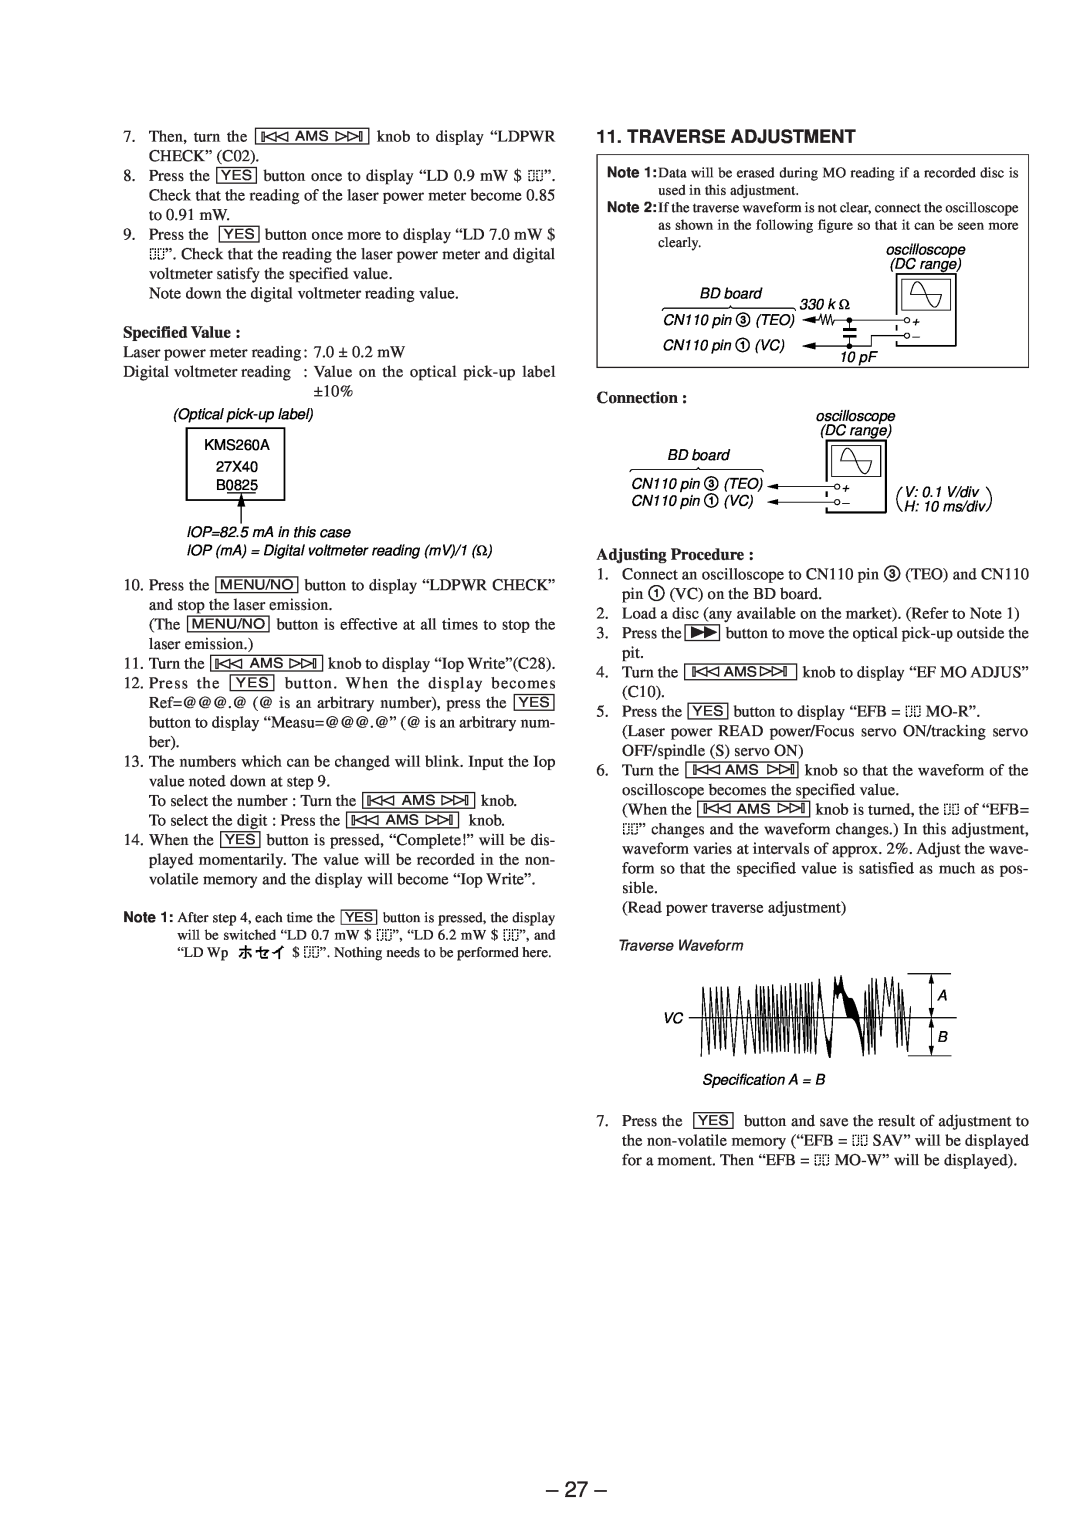 Sony MDS-JE630 service manual Traverse Adjustment, Specified Value, Connection, Adjusting Procedure 